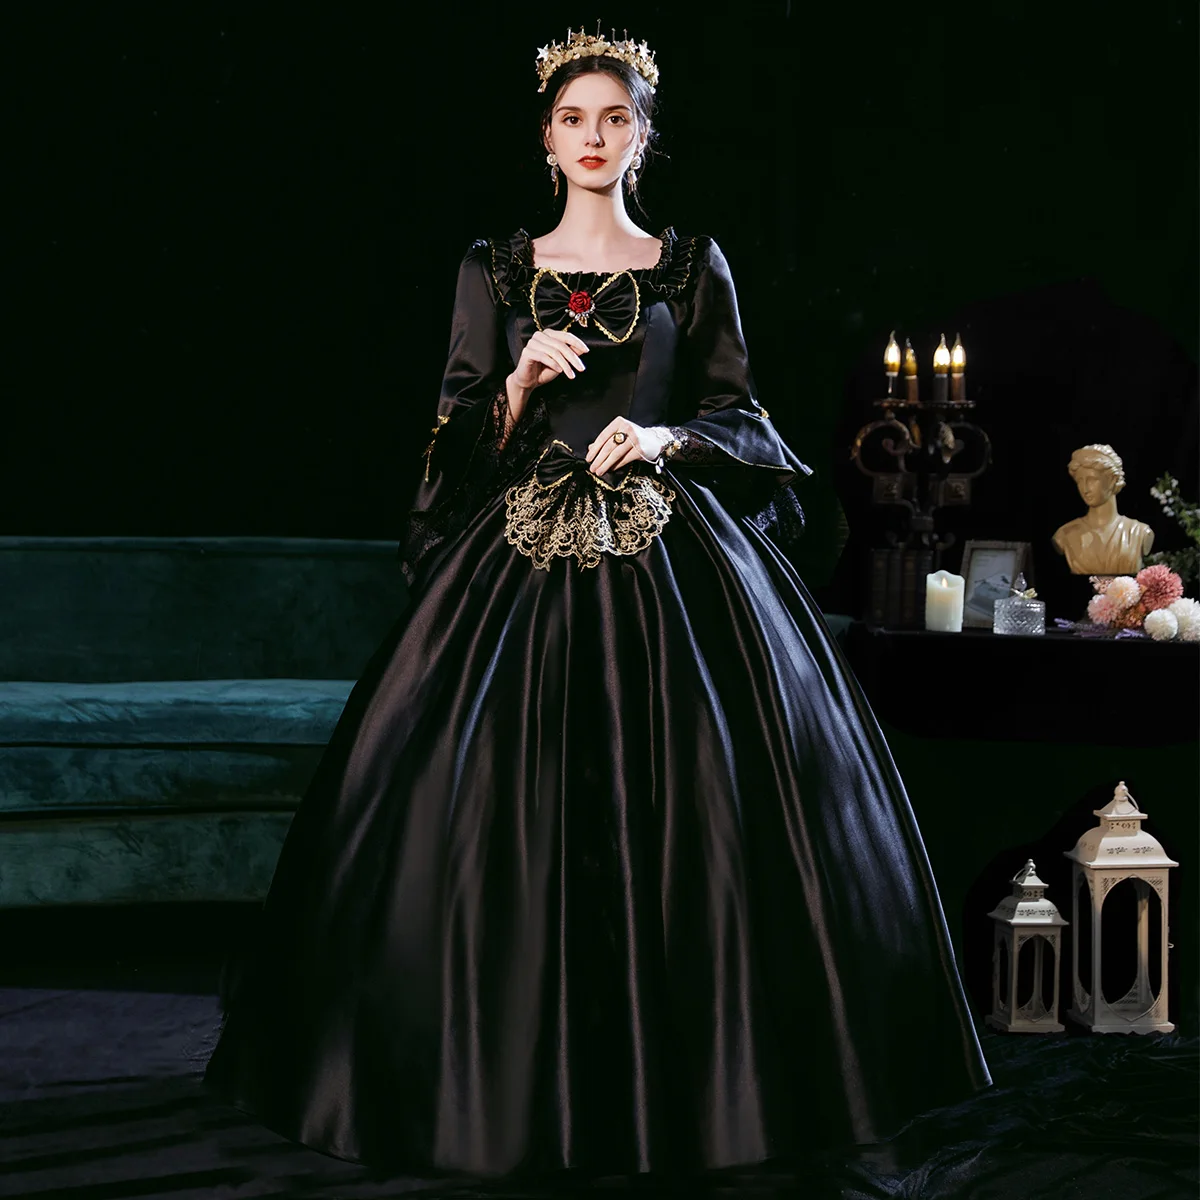 

Black Vintage Gothic Rococo Ball Gown Adult Halloween Party Dresses Women Baroque Colonial Masquerade Victorian Dress Costume